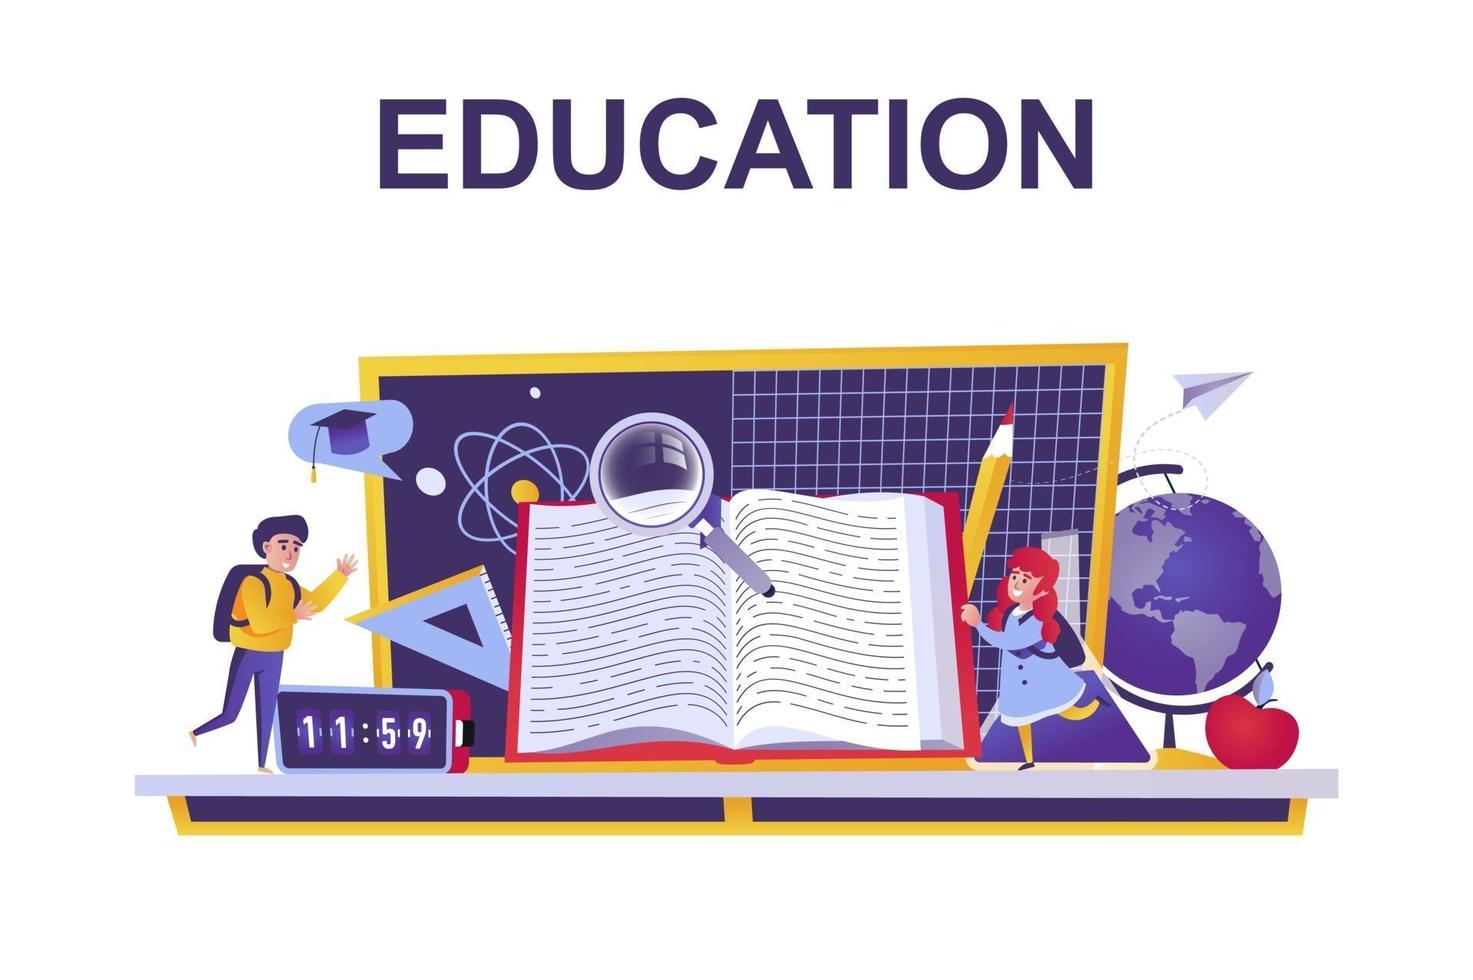 Education web concept in flat style vector